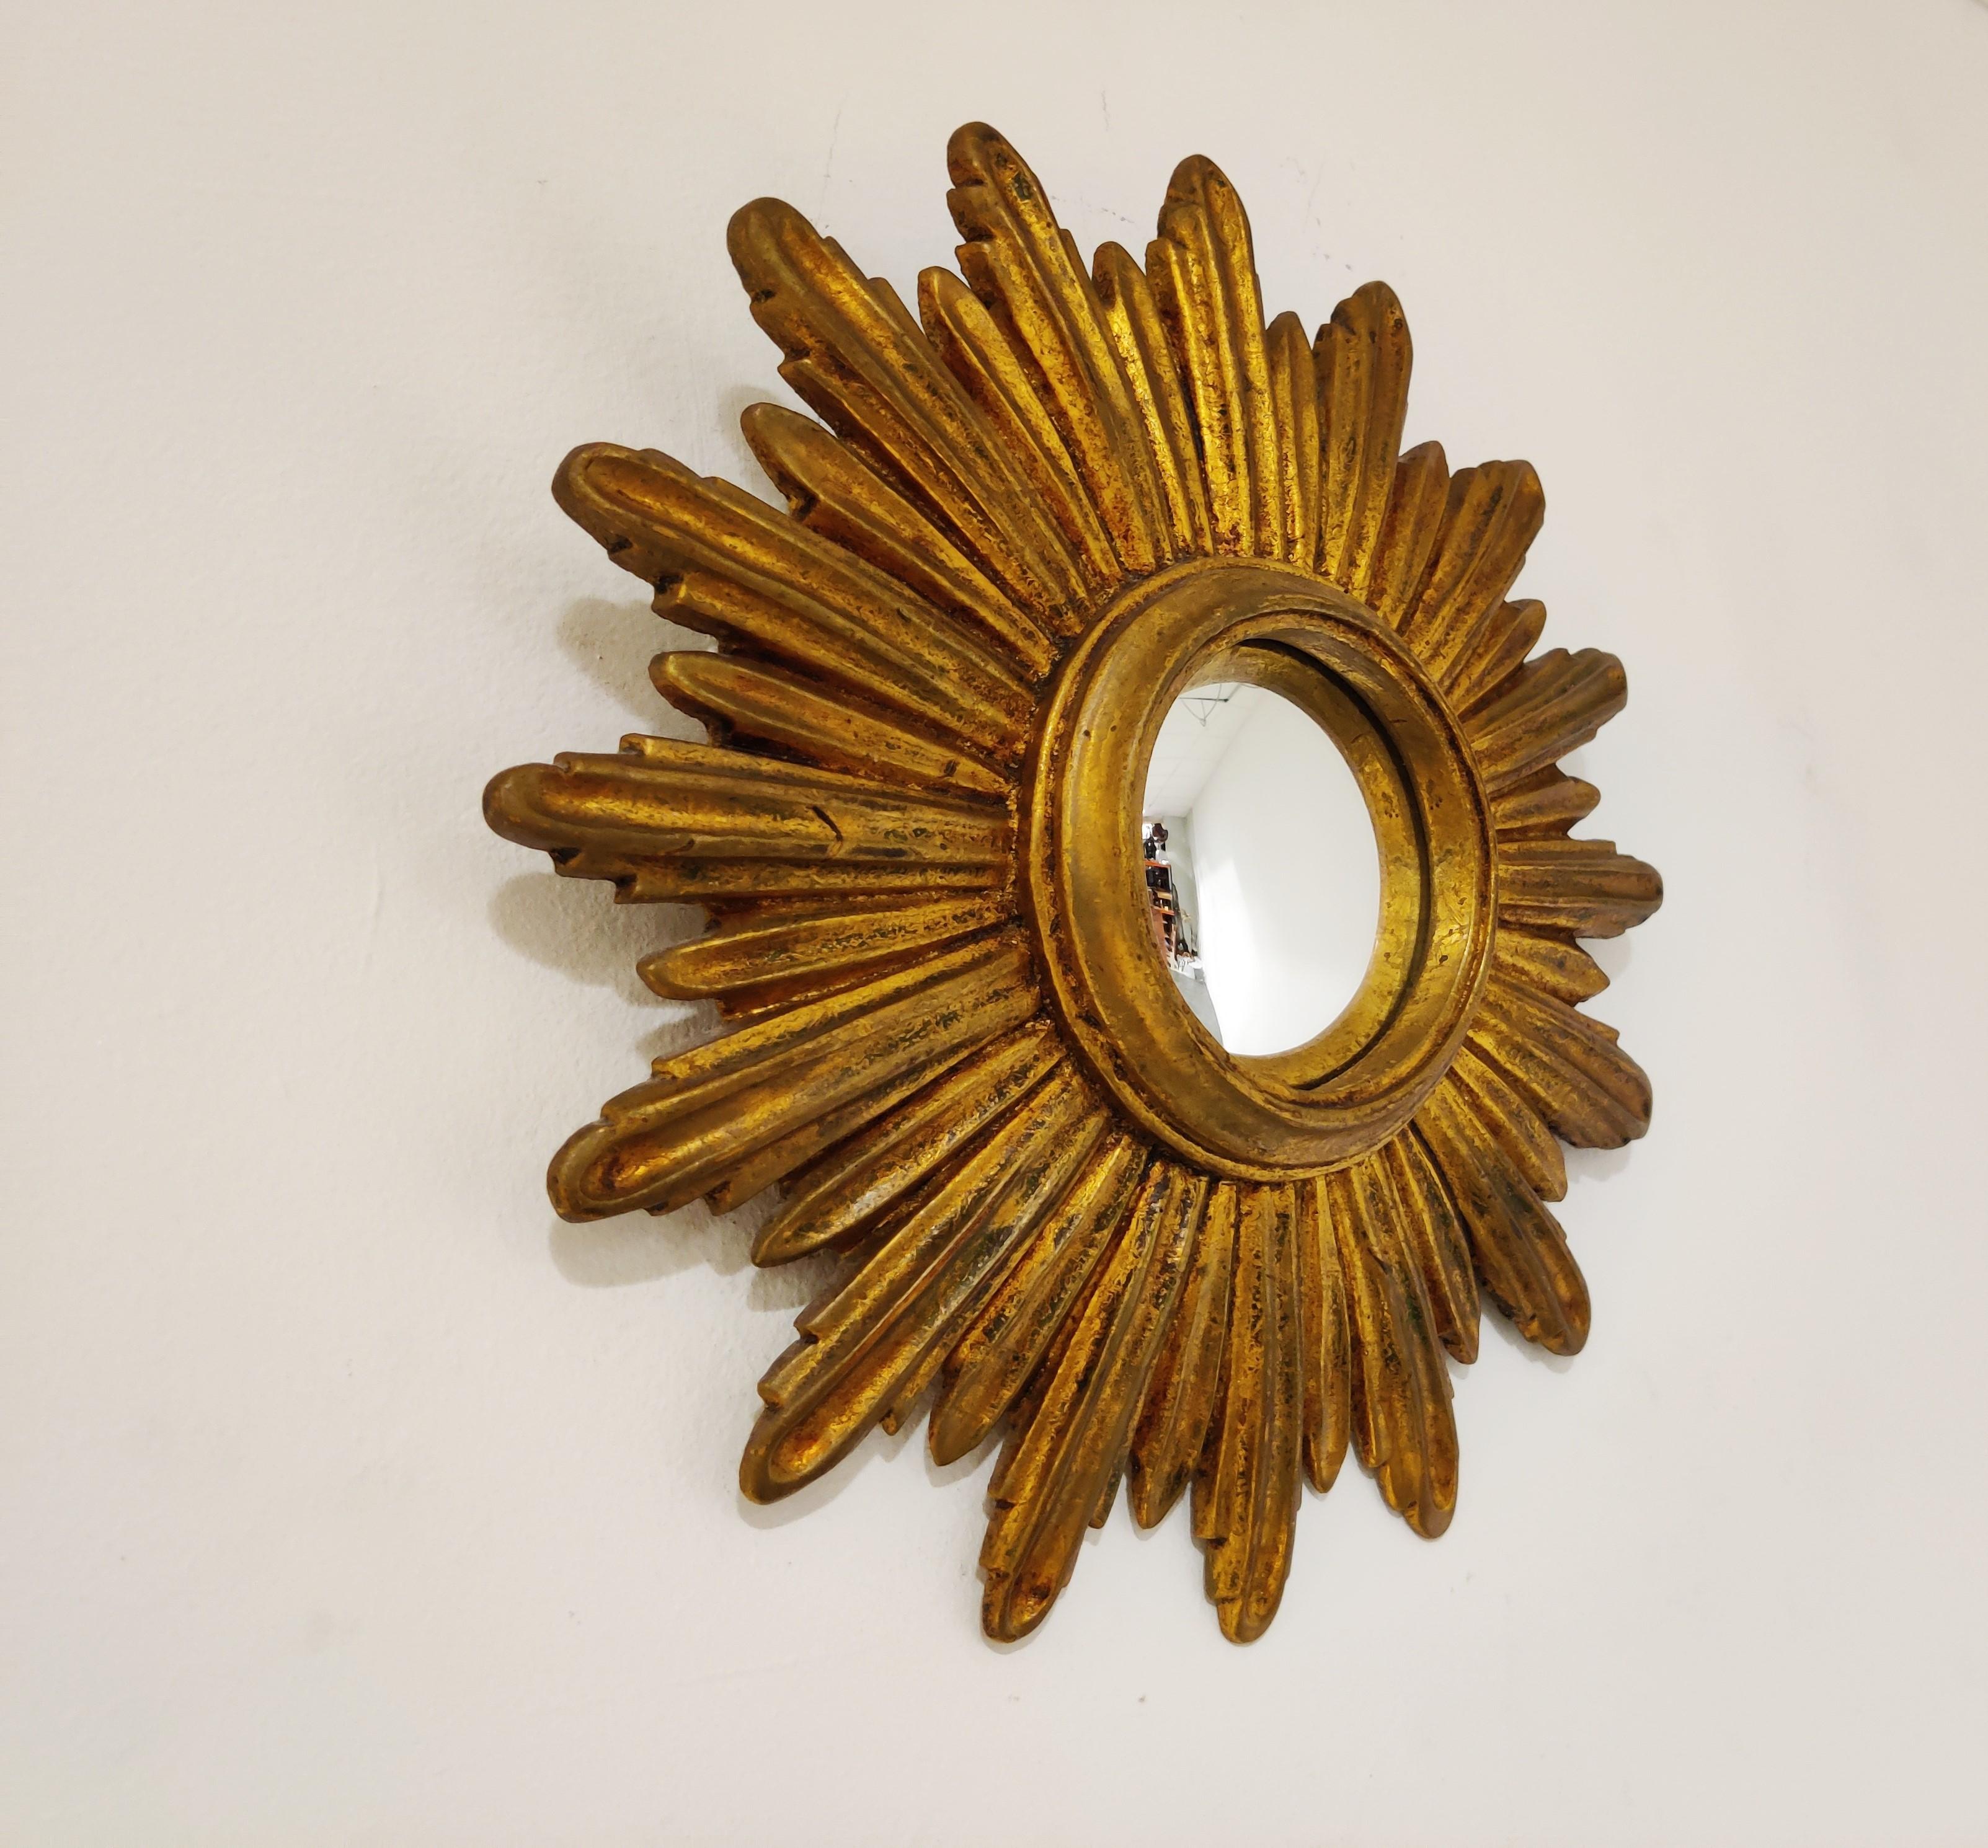 Small gilded resin sunburst mirror with convex mirror glass.

The golden mirror is in a very good condition.

This is a small example which is much harder to find.

1960s - Belgium

Good condition.

Dimensions:

Diameter